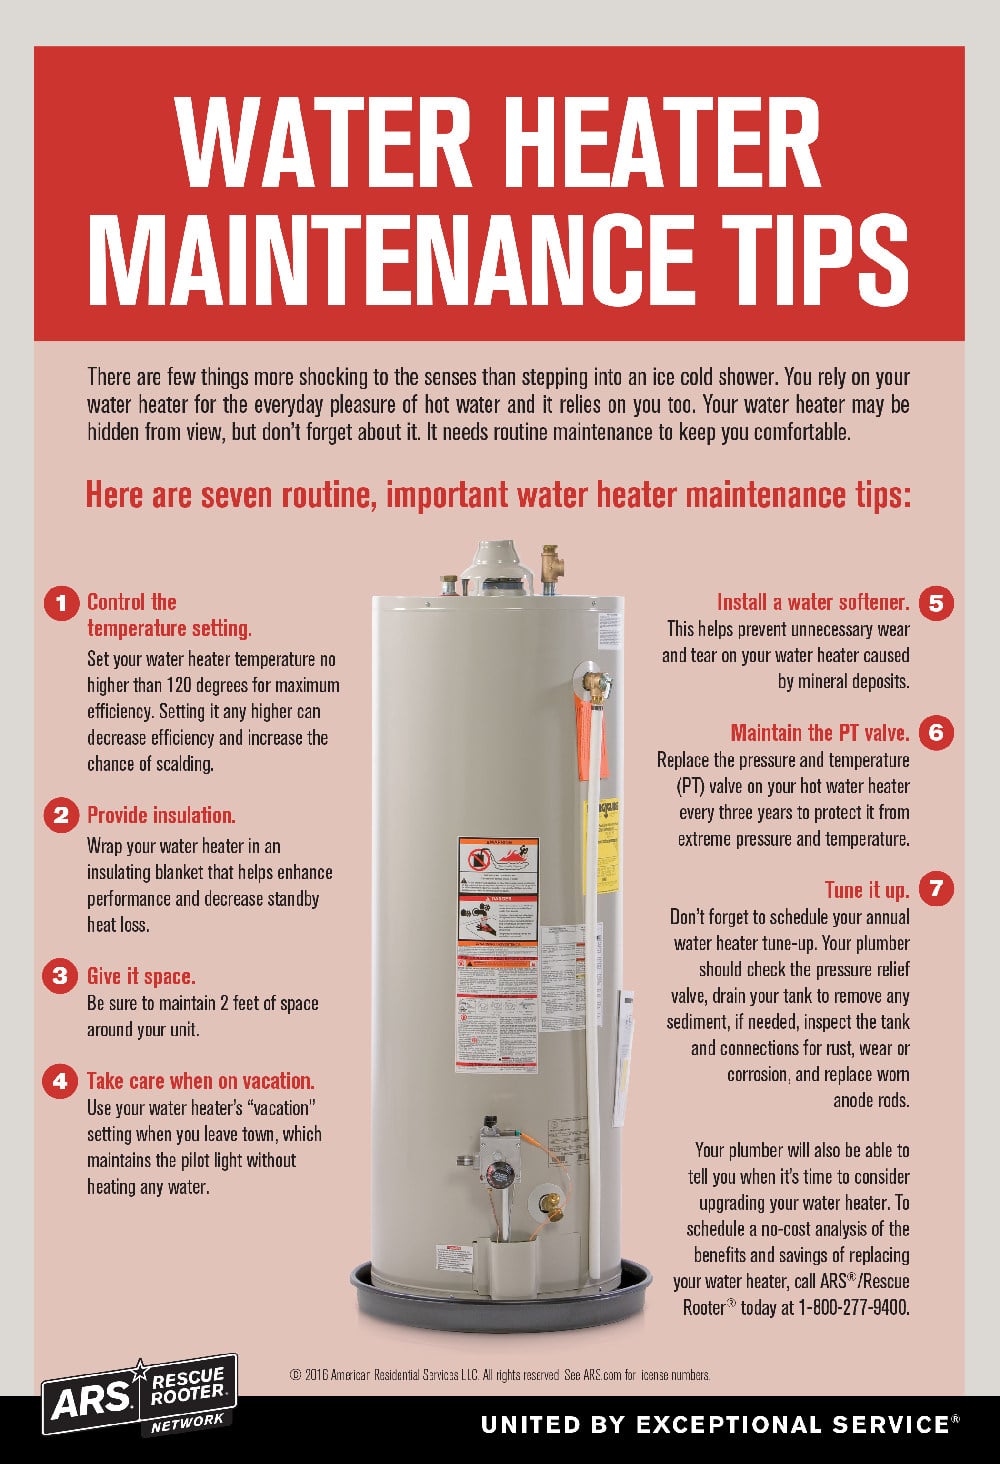 How To Increase Hot Water Water Heater Maintenance Tips You Can't Afford to Forget